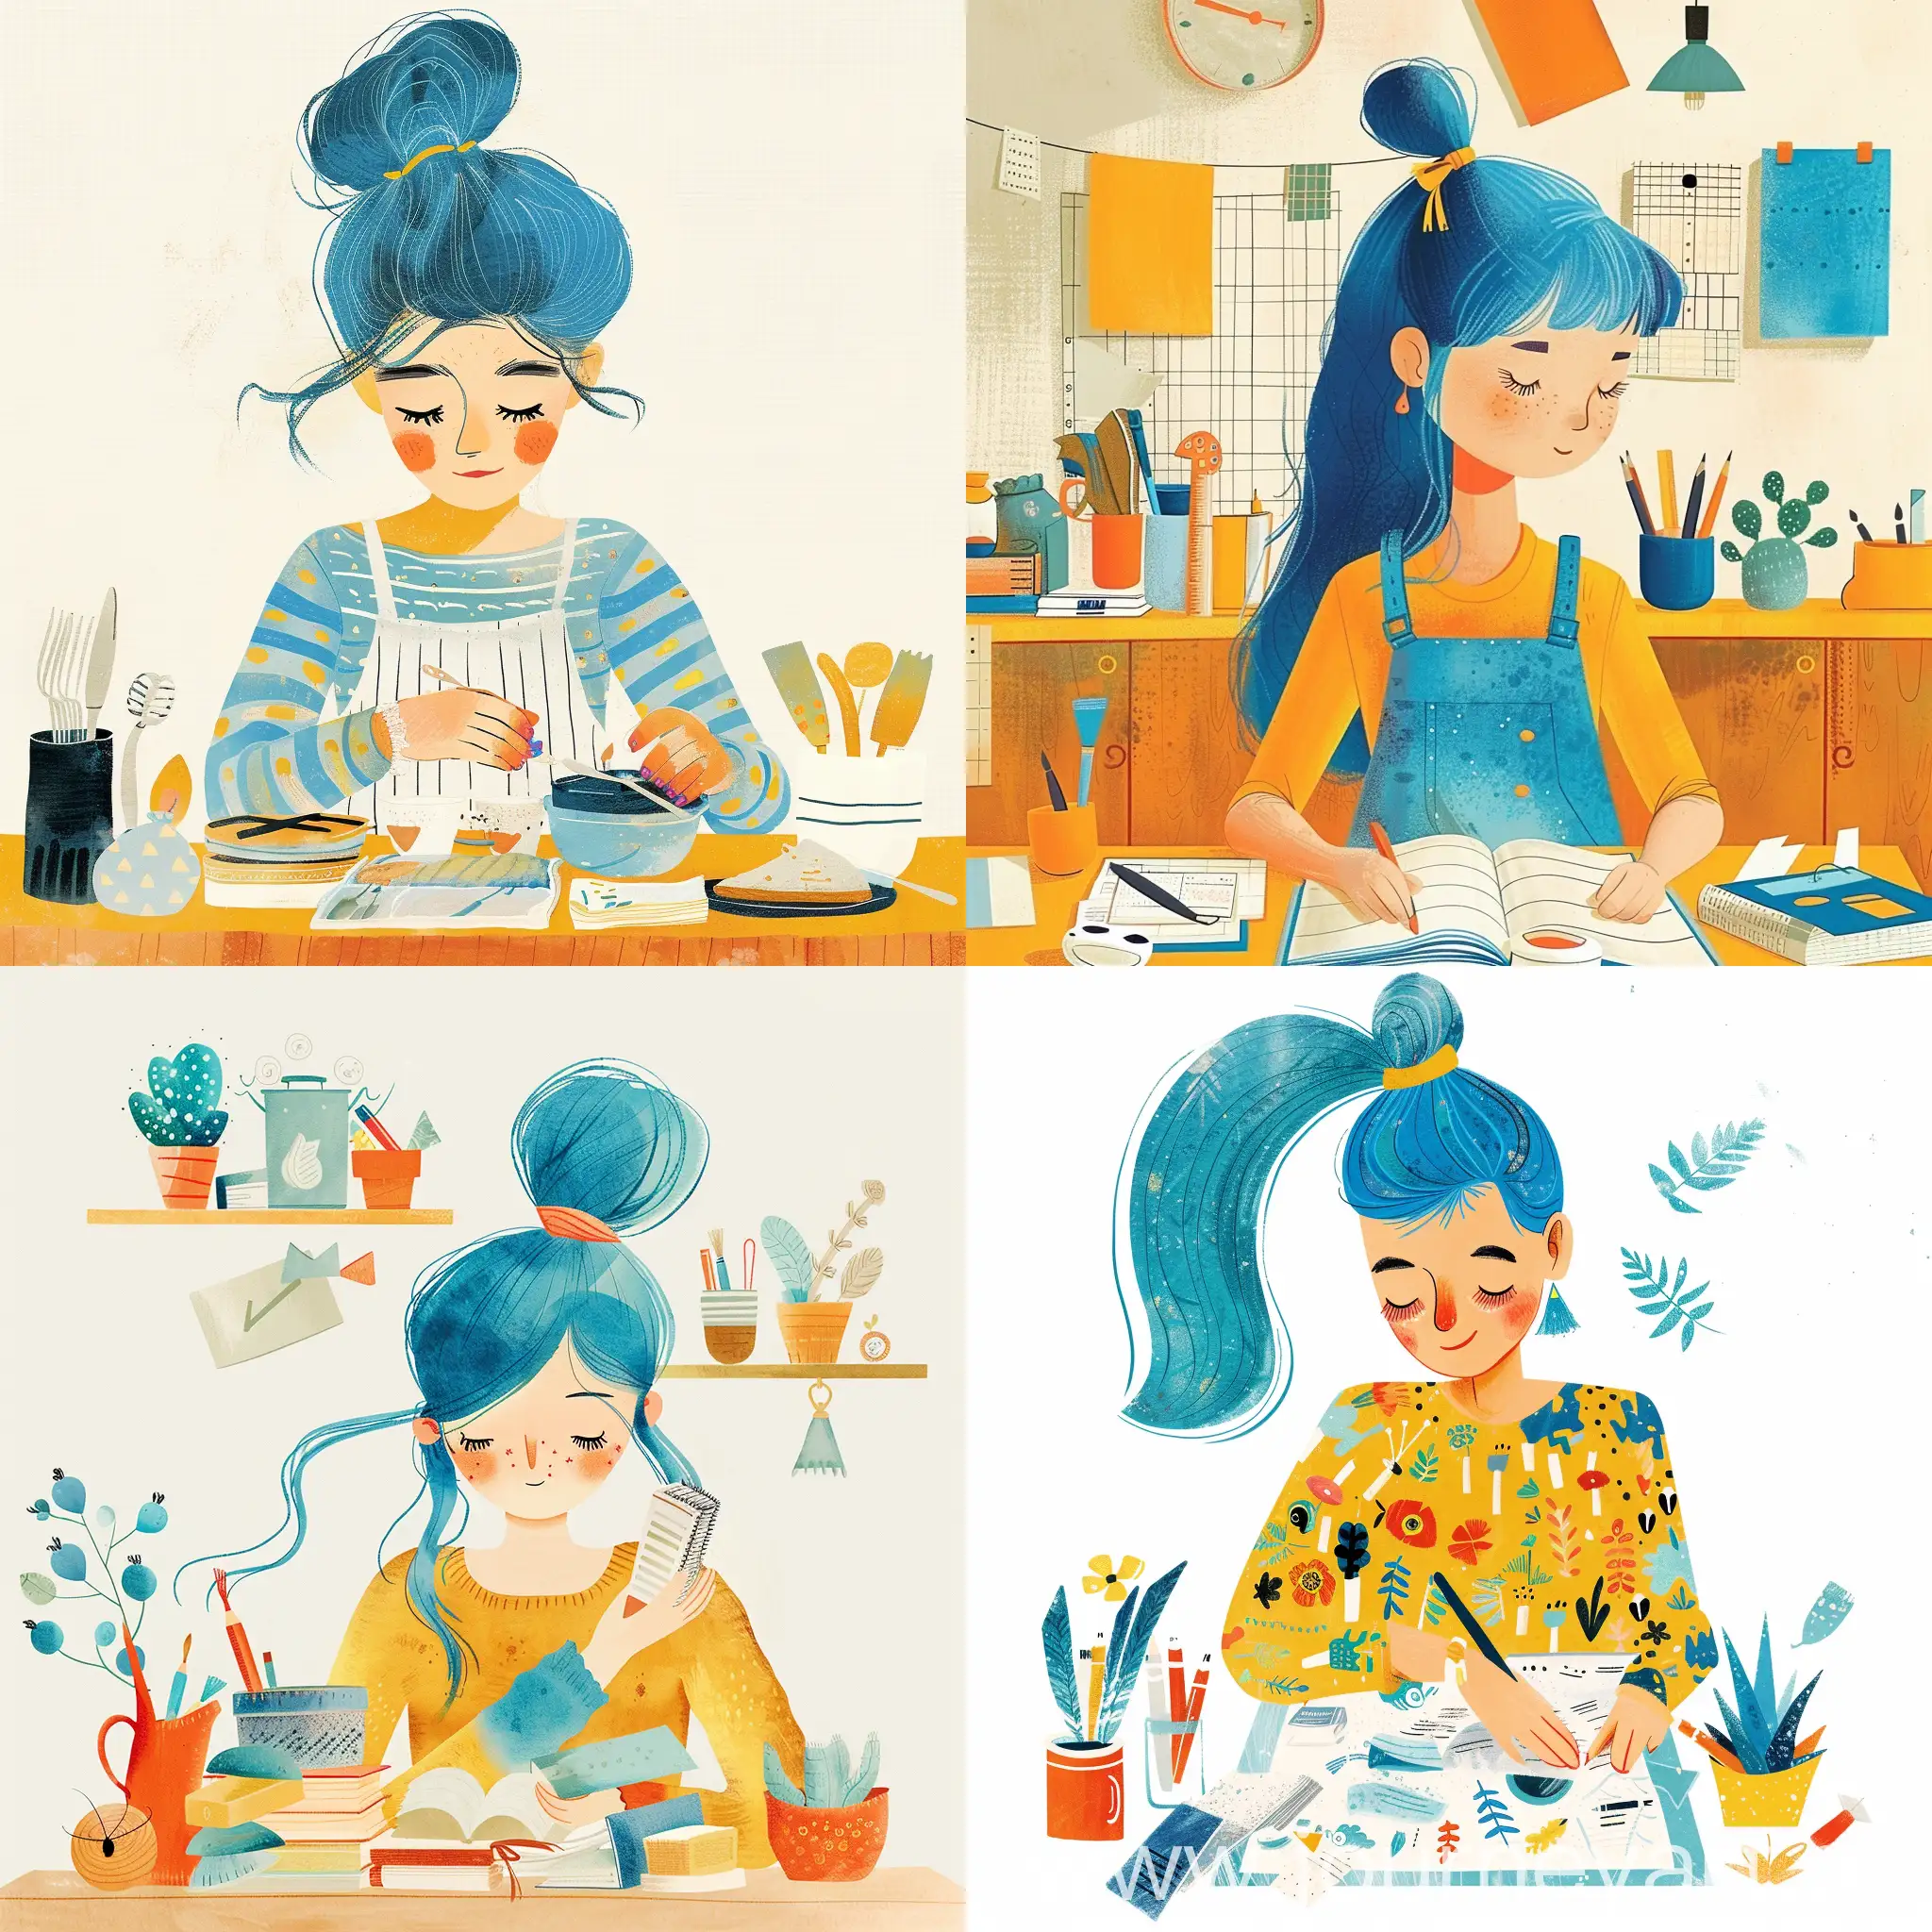 Creative-Woman-with-Blue-Hair-Working-on-Tasks-Childrens-Book-Illustration